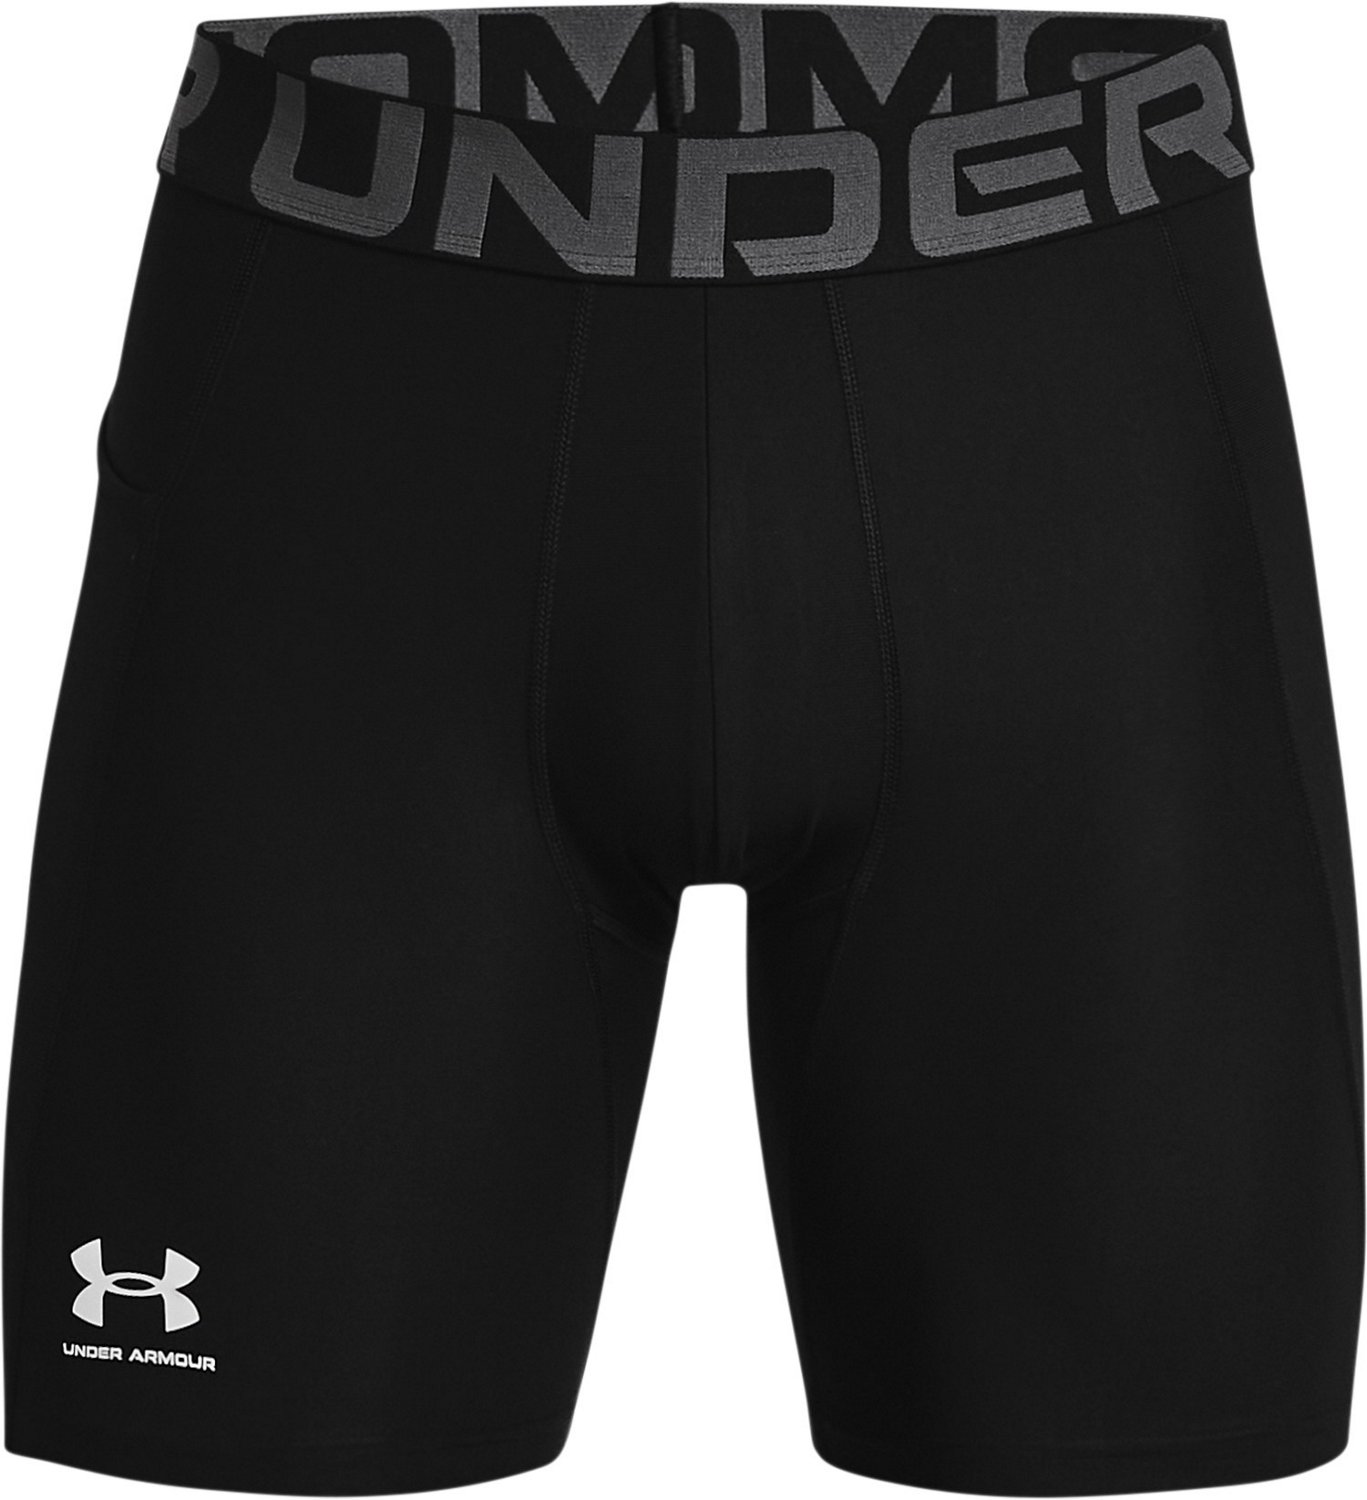 Under Armour Heatgear Armour Stretch Compression Short Yellow 1257556-731 -  Free Shipping at LASC